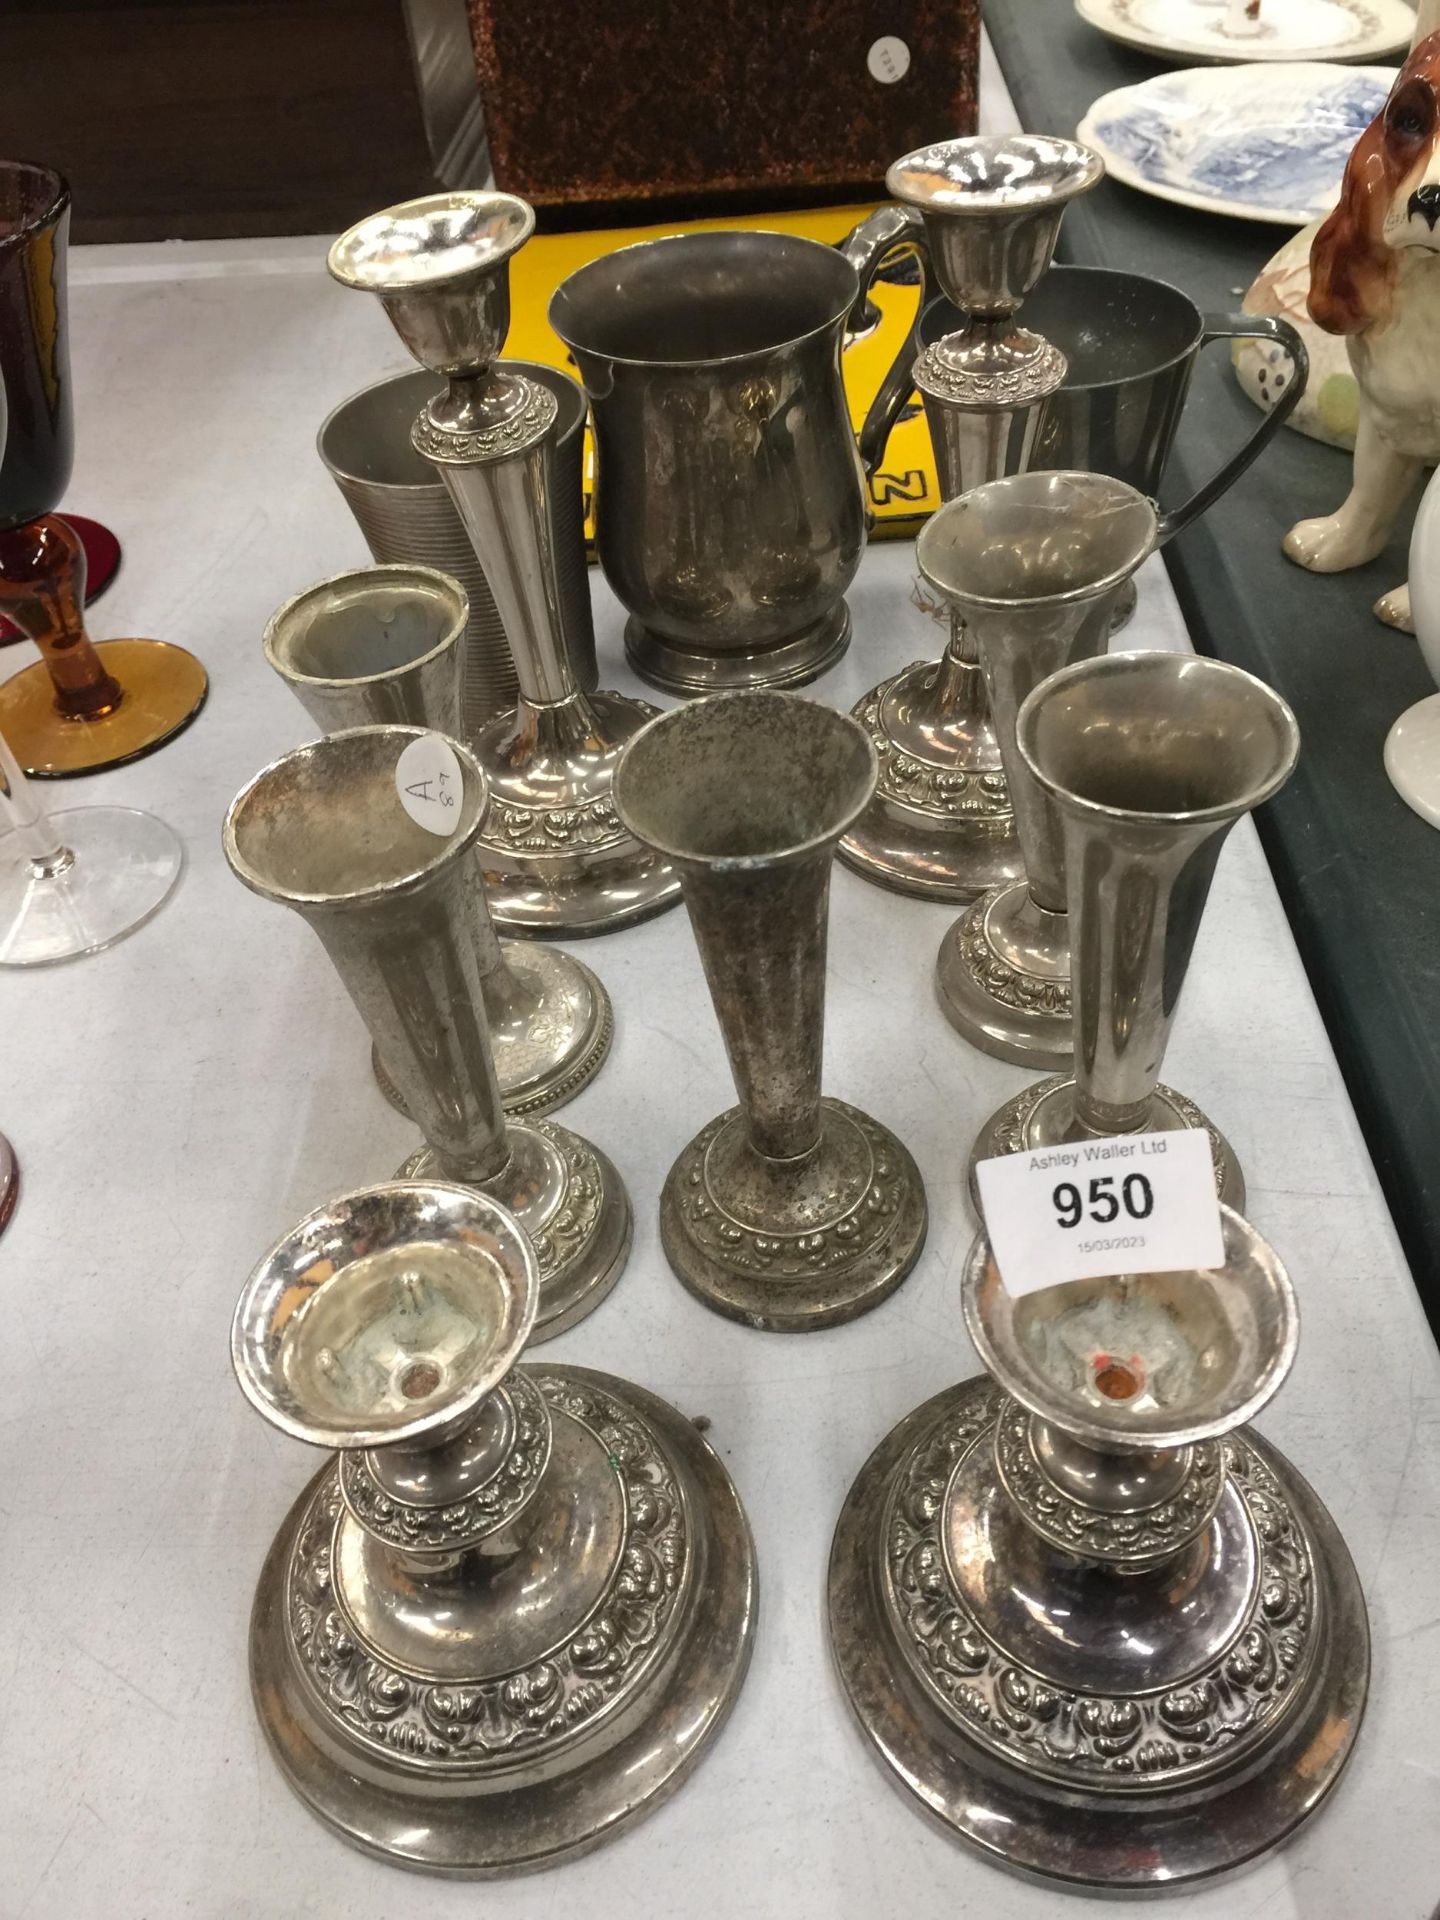 VARKIOIUS WHITE METAL AND SILVER PLATED ITEMS TO INCLUDE CANDLESTICKS, VASES, TANKARDS ETC